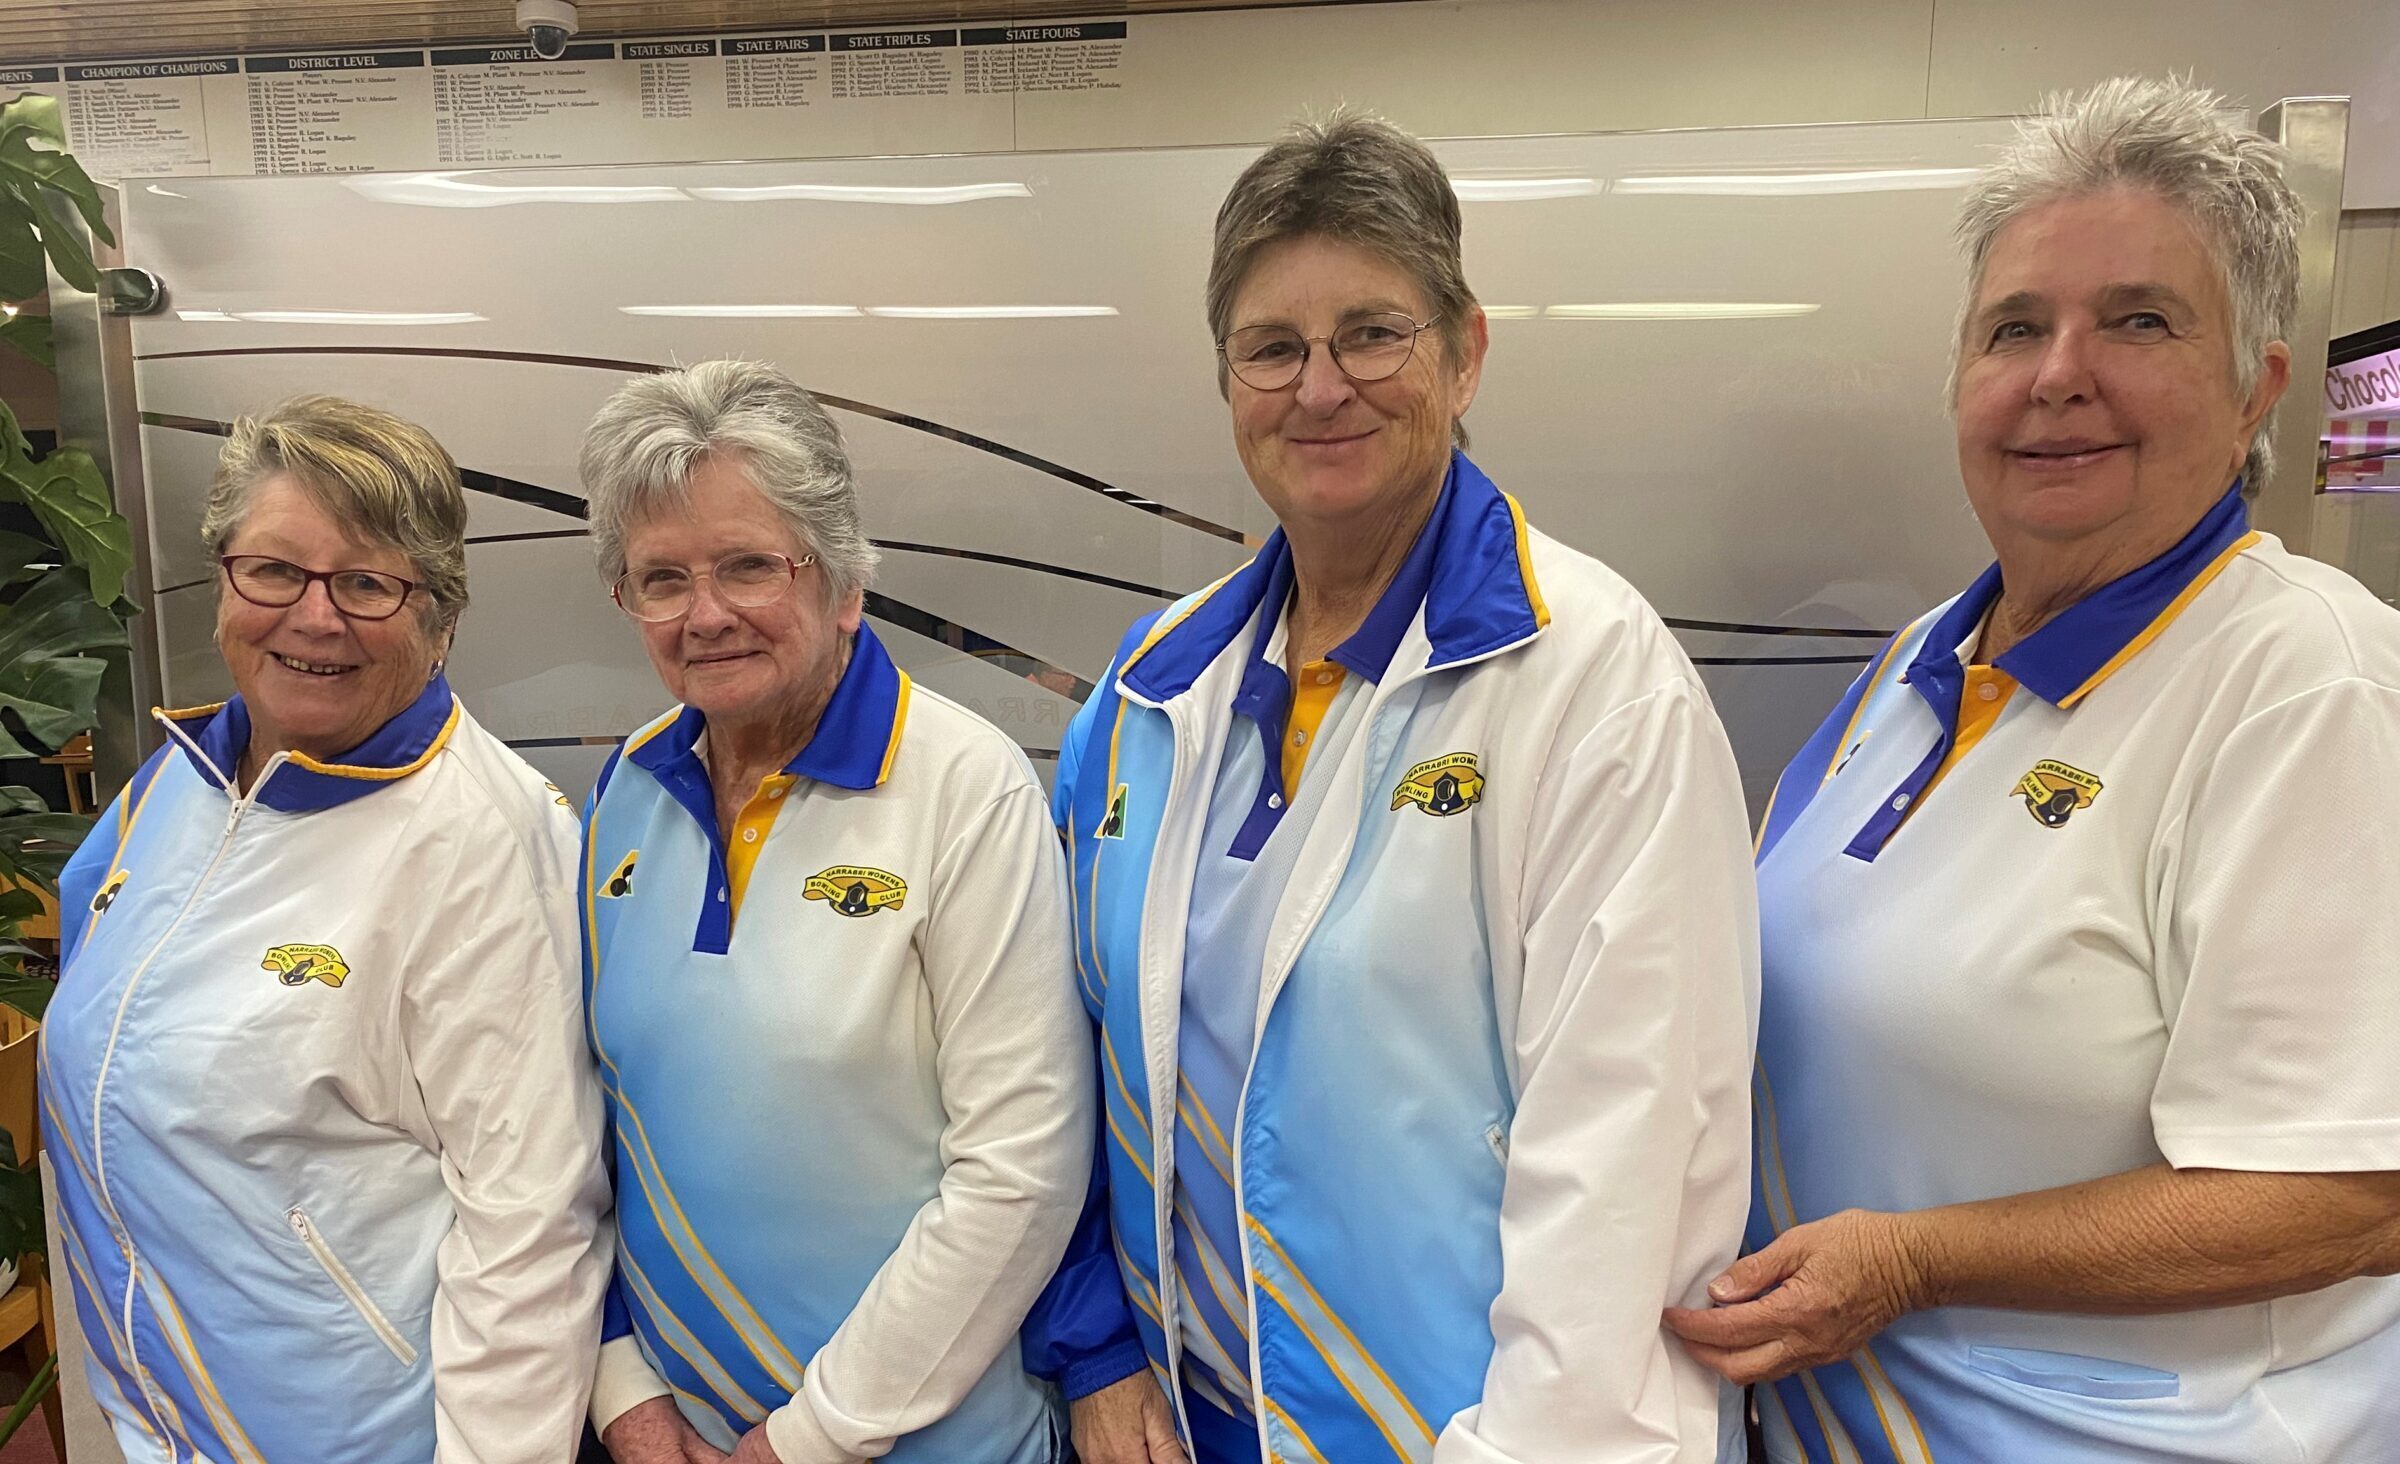 Narrabri ladies win the 2021 District Senior Fours final on home green